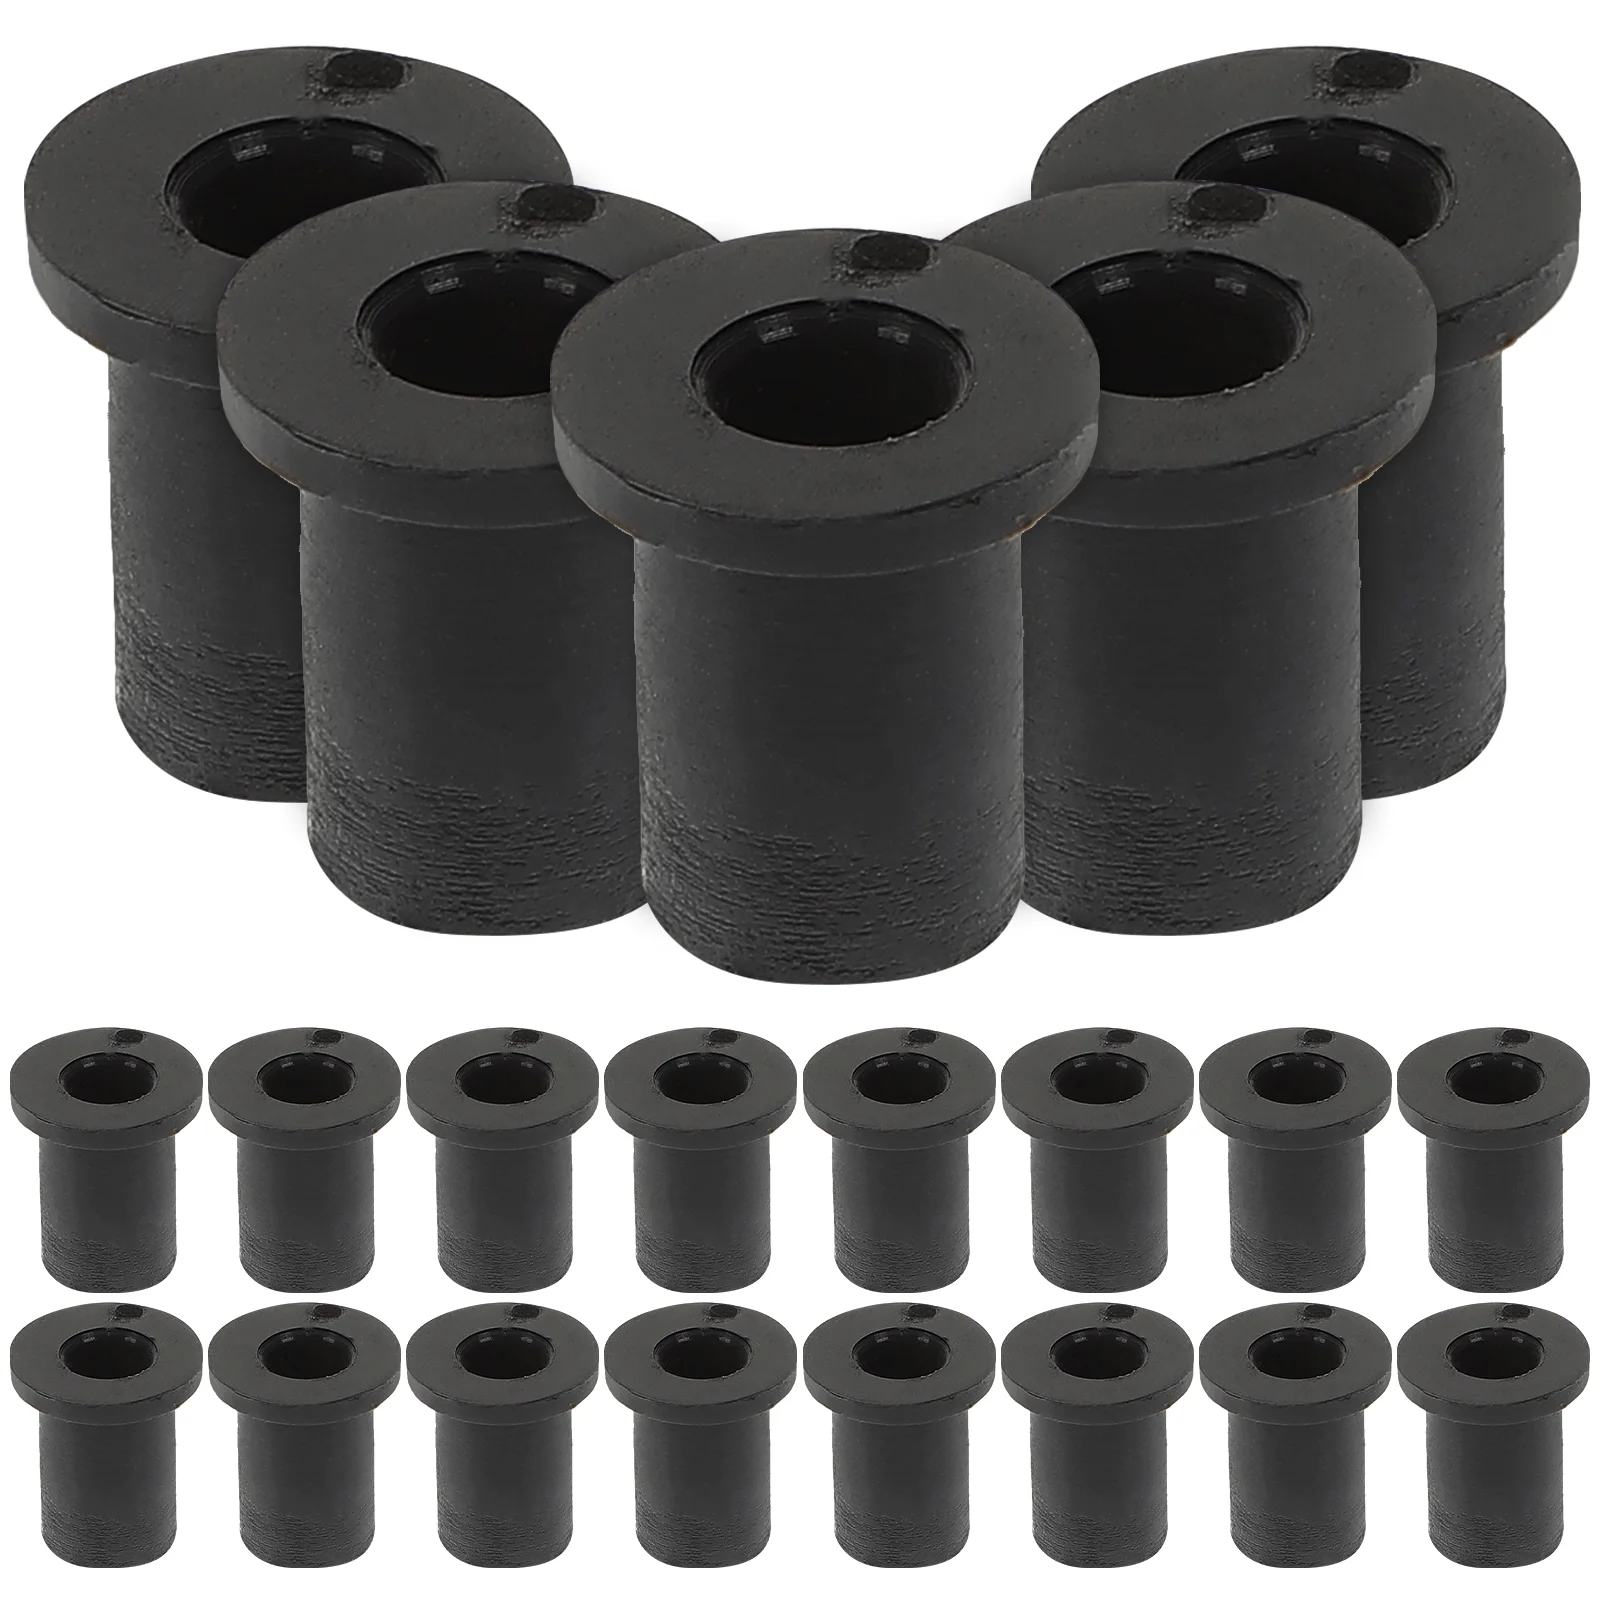 

25pcs Well Nut Motorcycle Windscreen Nut Expansion Nut With 5/16 Inch Hole